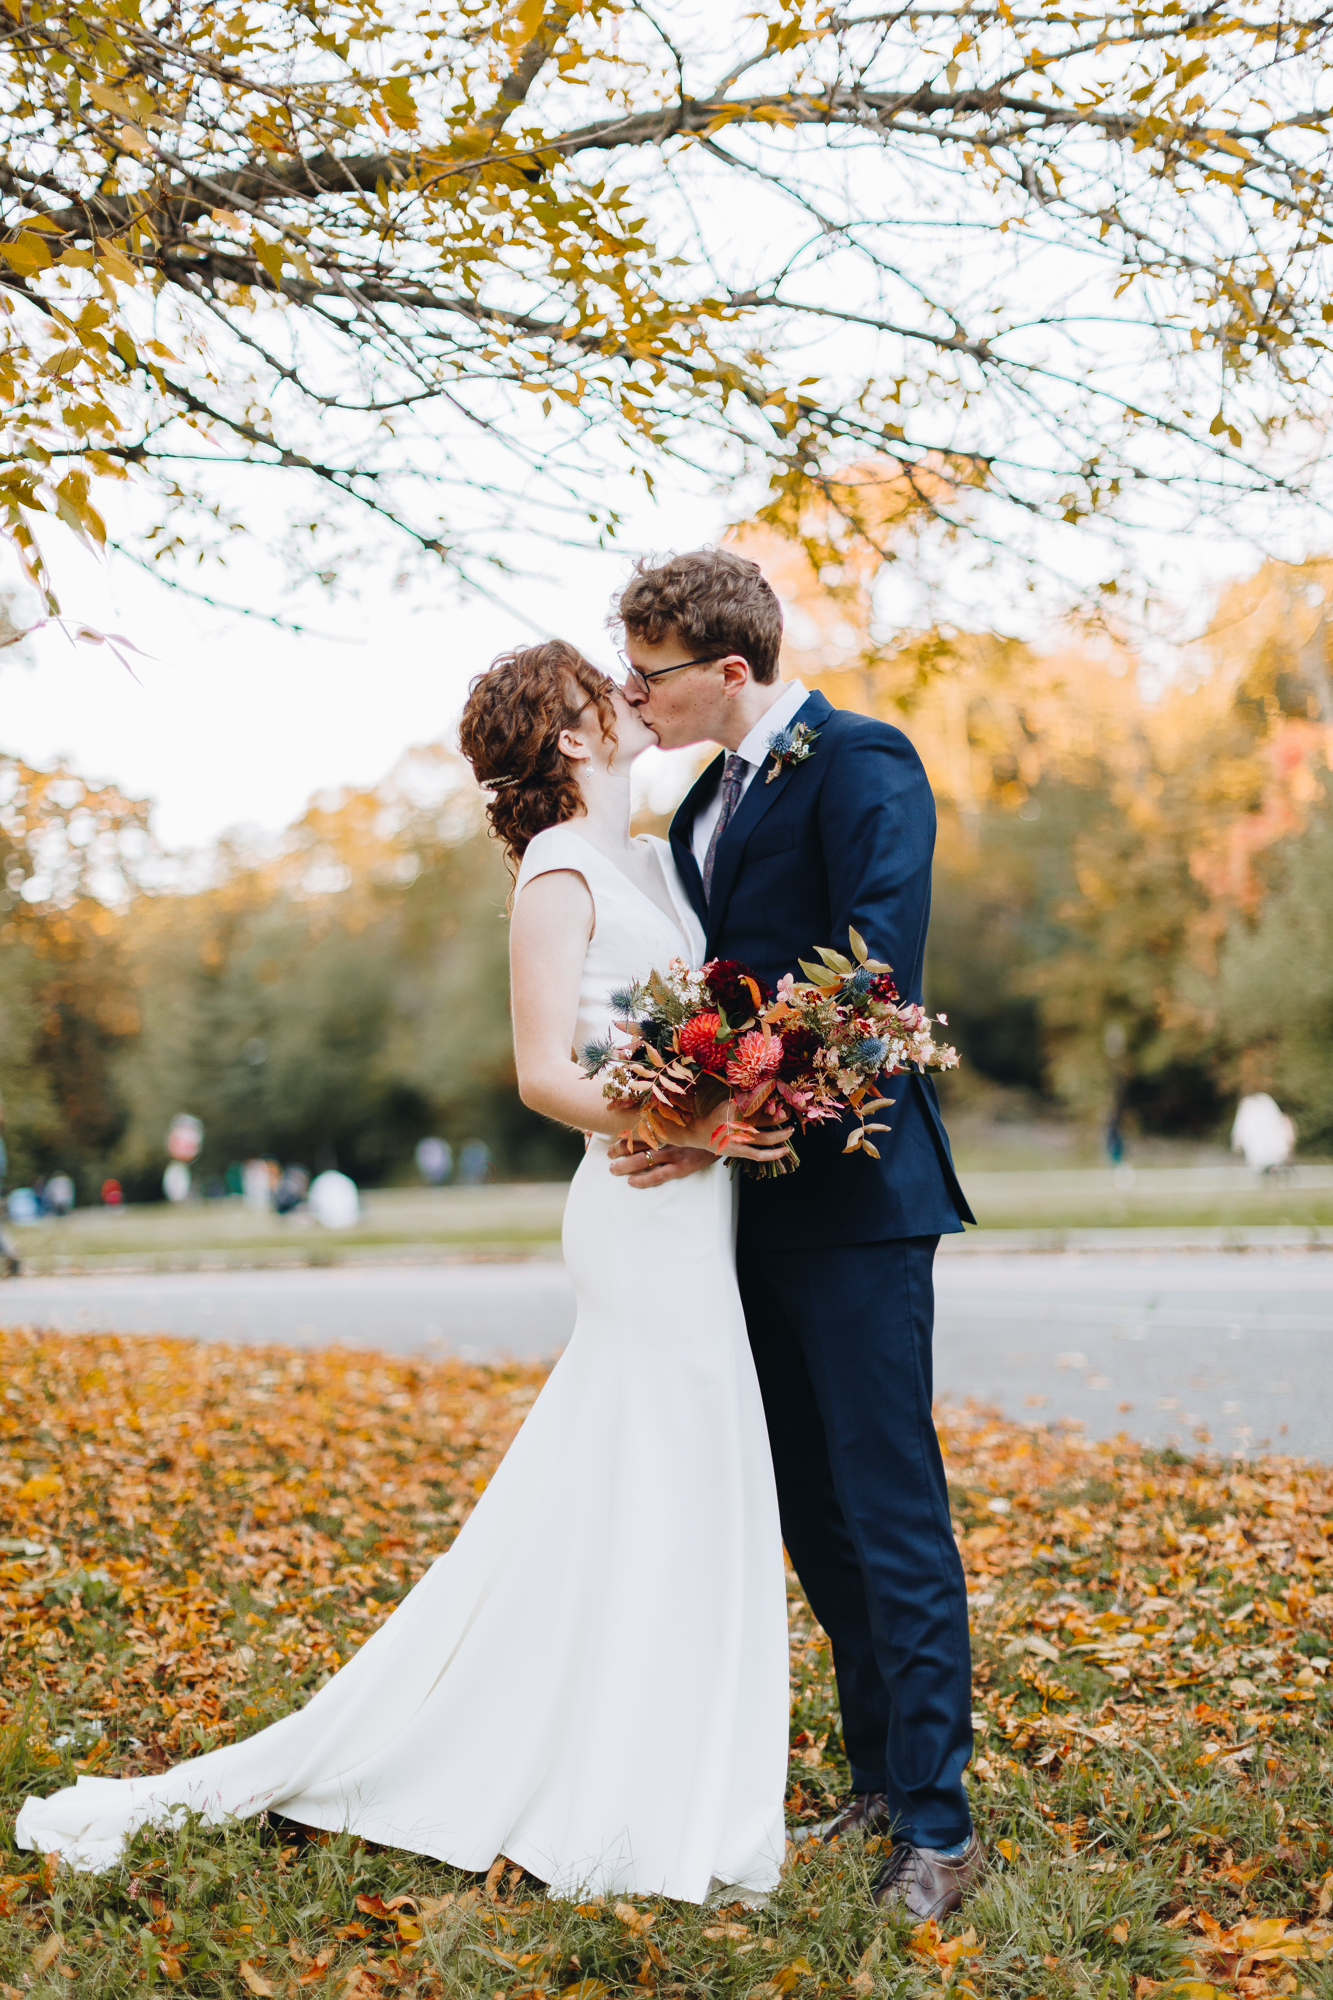 Fall wedding photos in Prospect Park with orange leaves